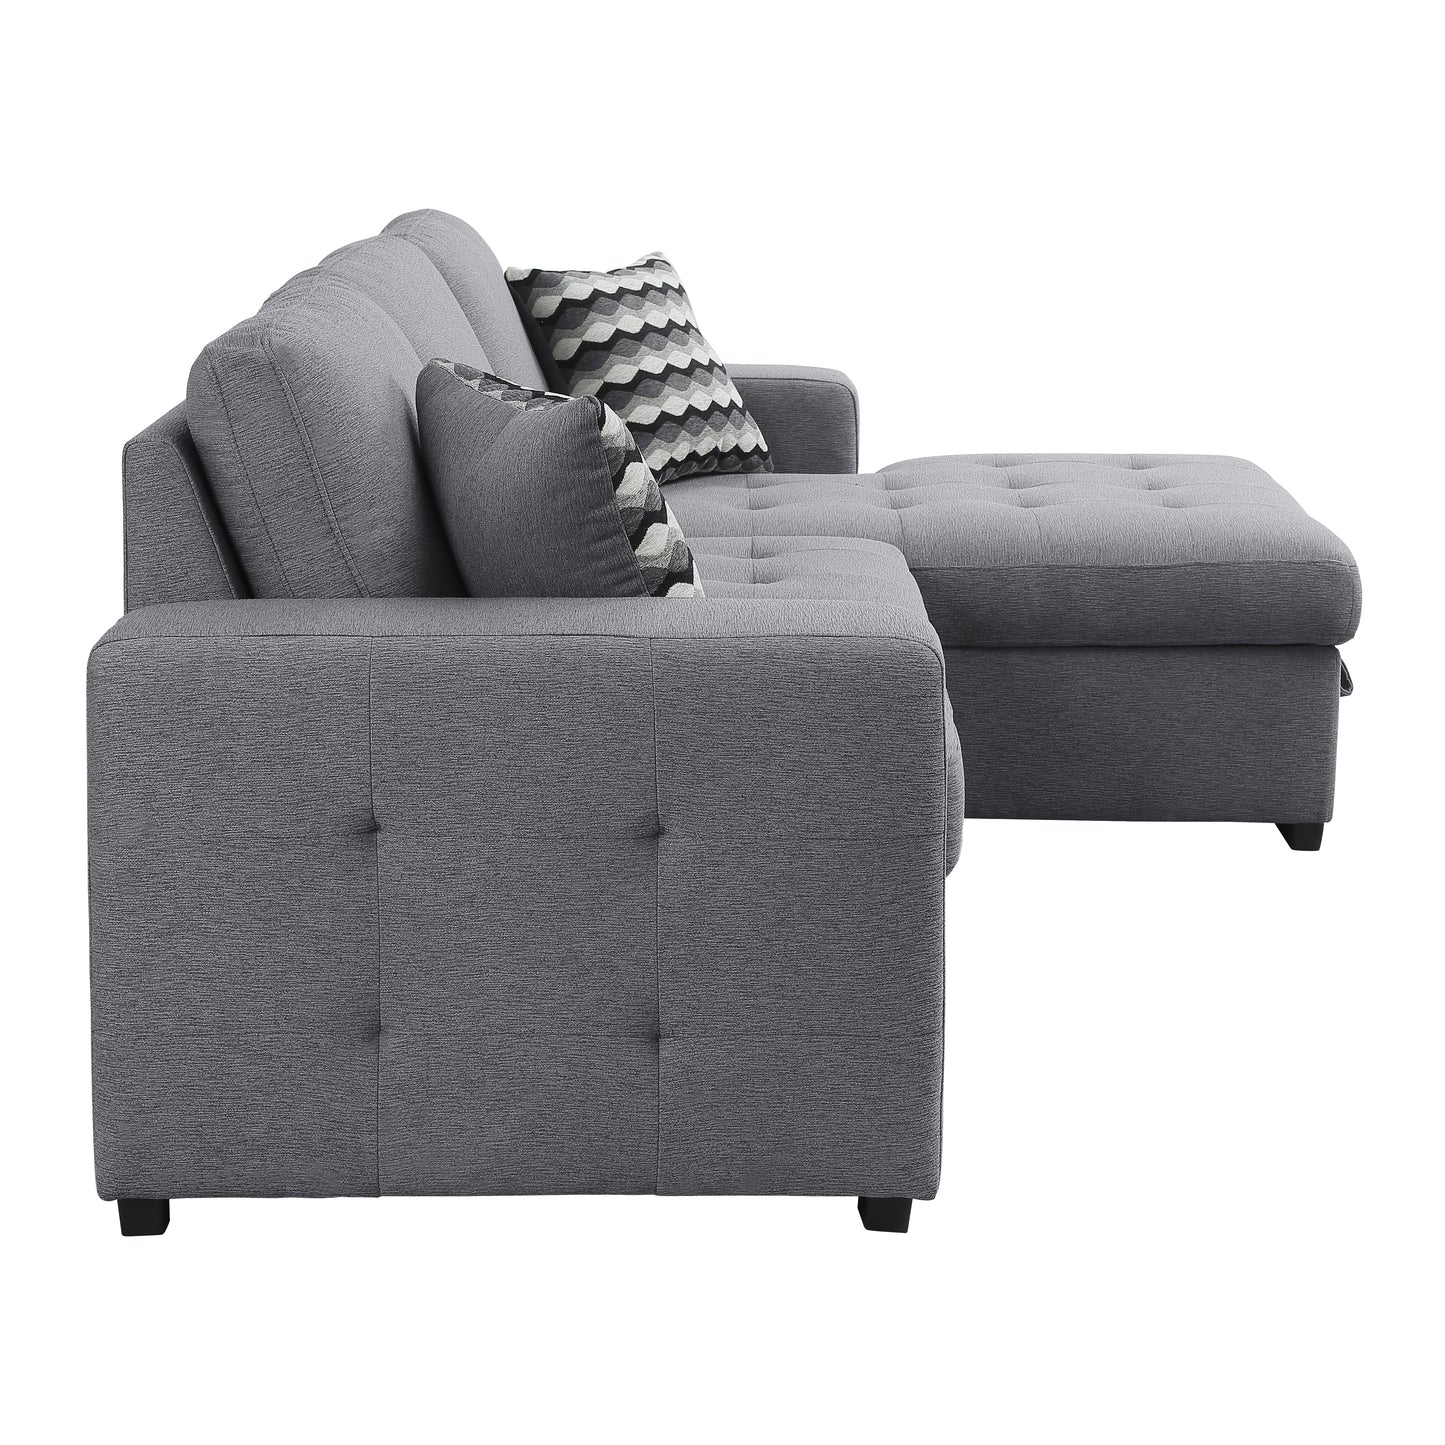 Soloman 2-Piece Sectional W/ Hidden Storage & Right Chaise Only